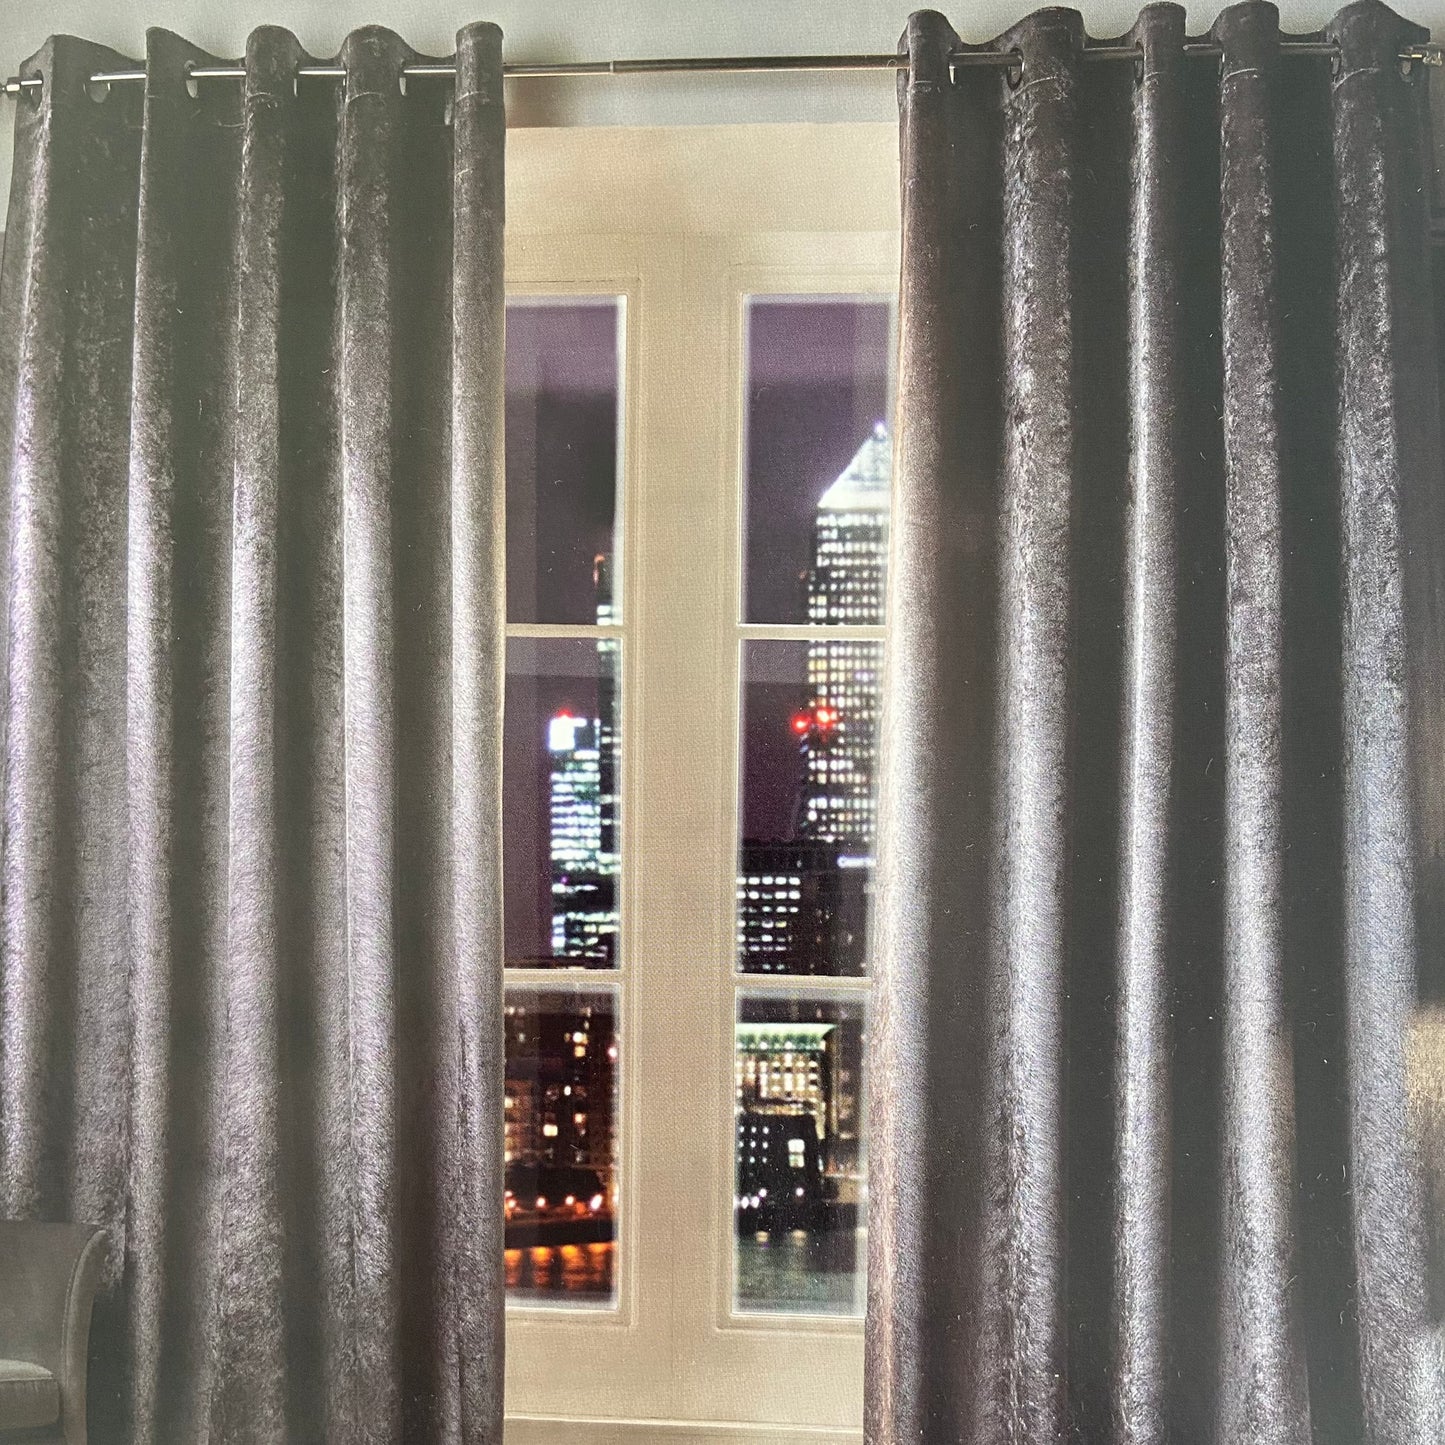 Adelphi Eyelet Curtains by Kylie Minogue at Home